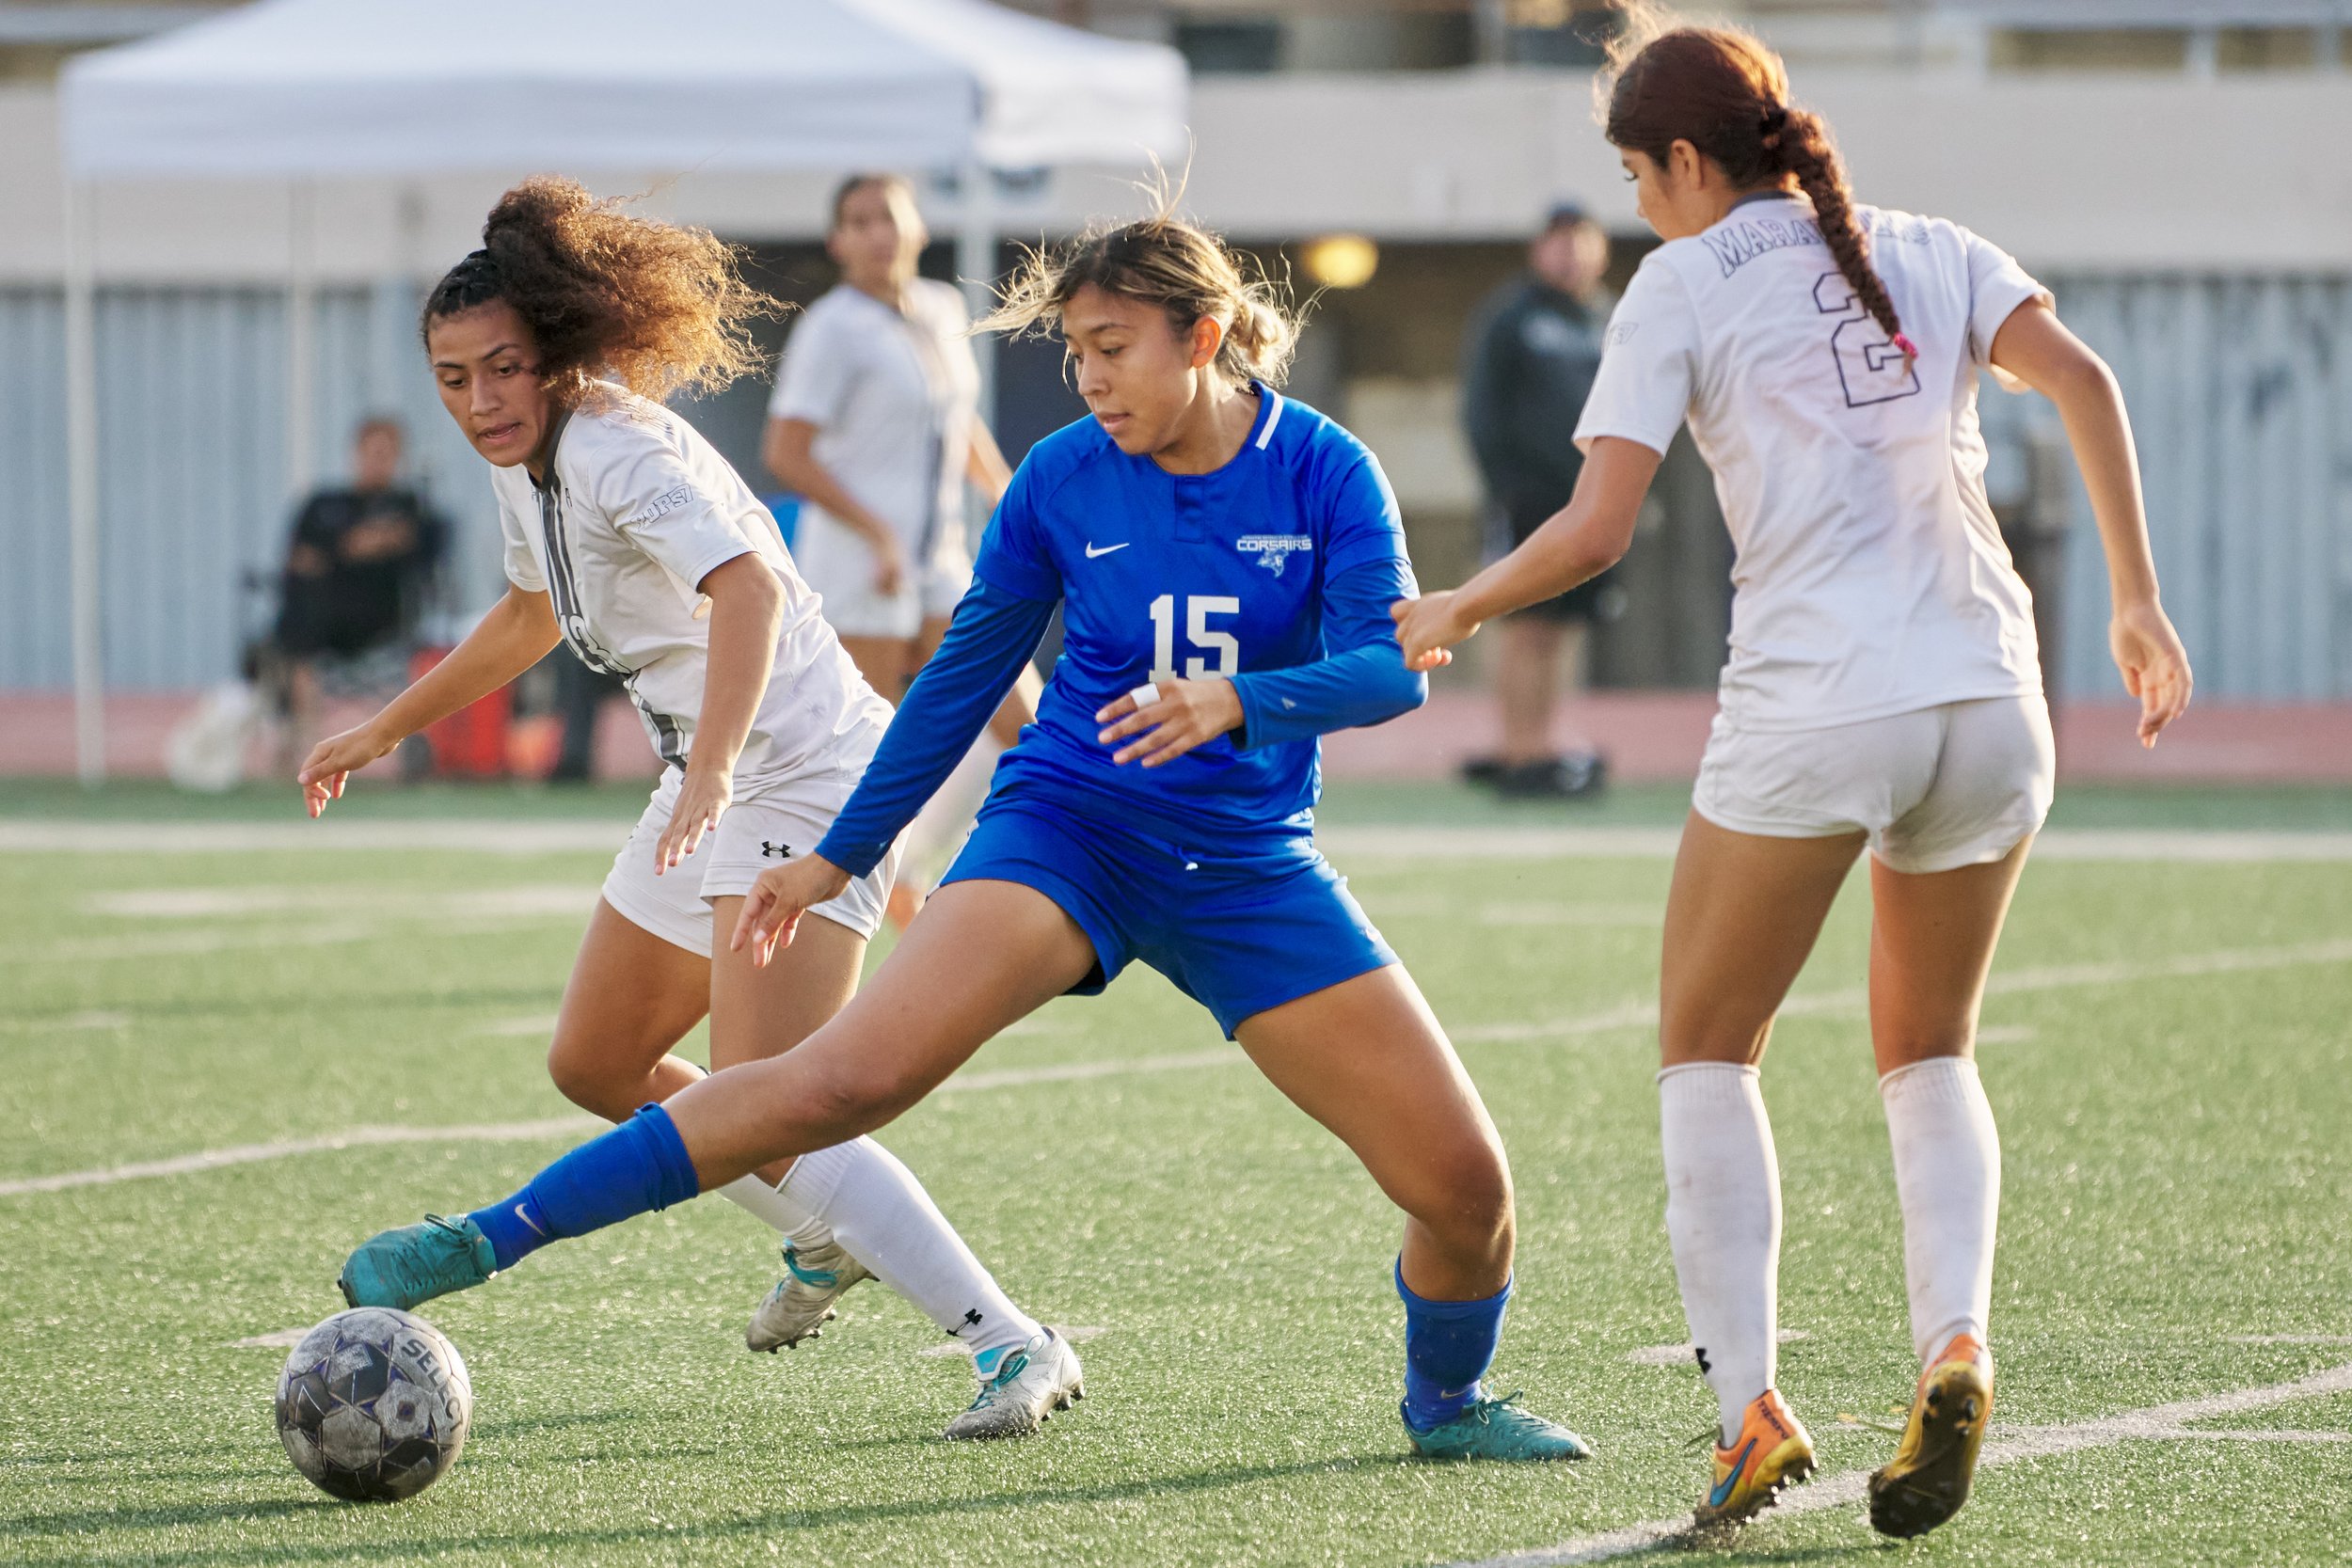  Santa Monica College Corsairs' Julia Pioli (center) keeps control of the ball away from Antelope Valley College Marauders' Cassi James (left) and Kaylin Gonzalez (right) during the women's soccer match on Tuesday, Oct. 11, 2022, at Corsair Field in 